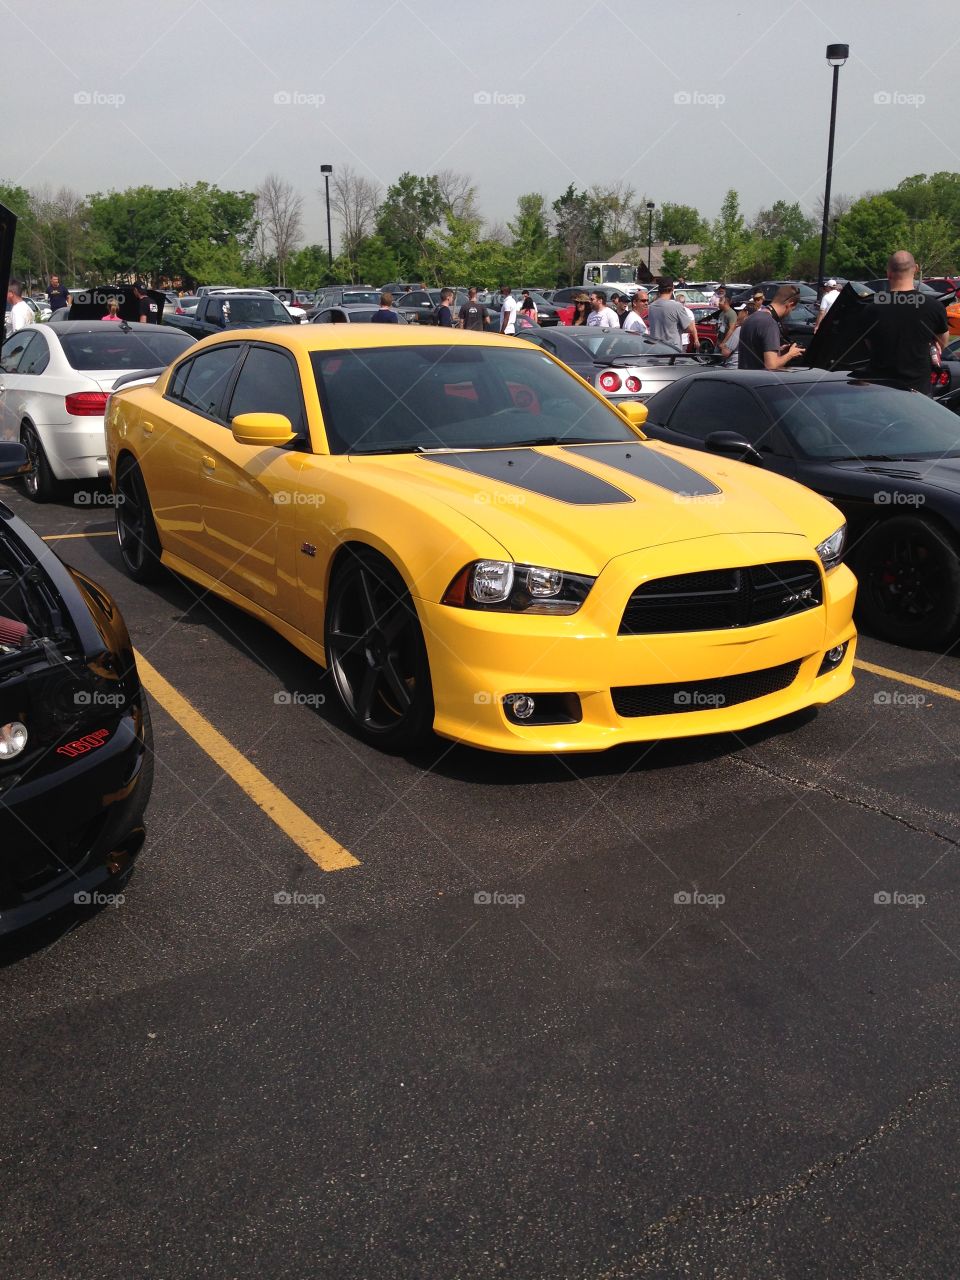 Dodge Charger at Car Show